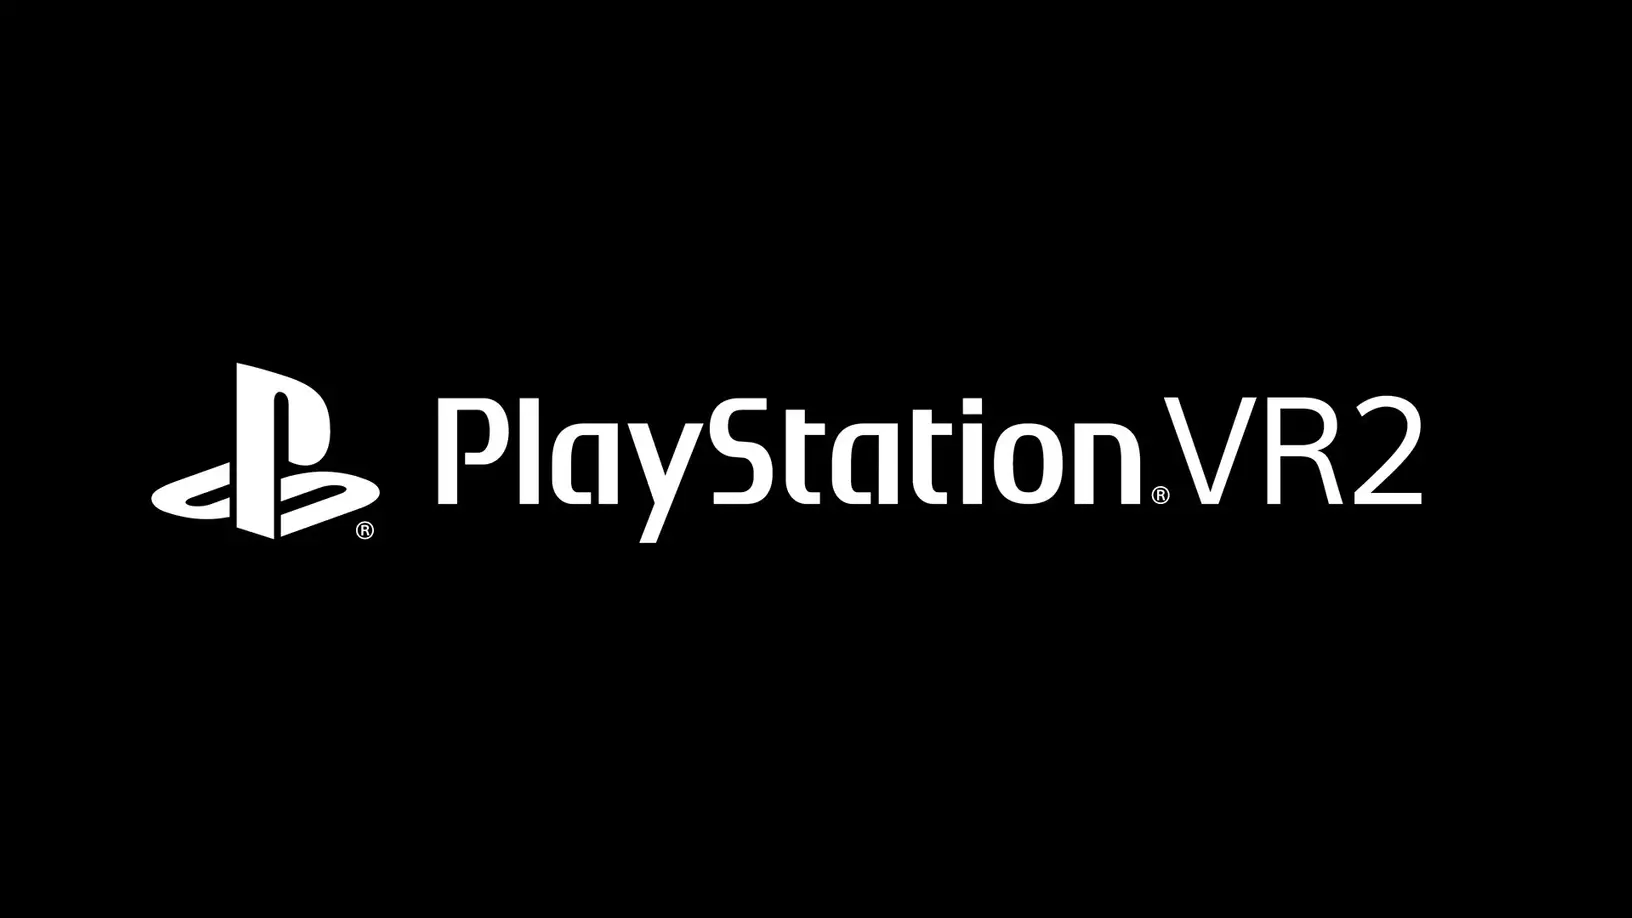 Sony announcing PlayStation VR2 – the next generation of virtual reality